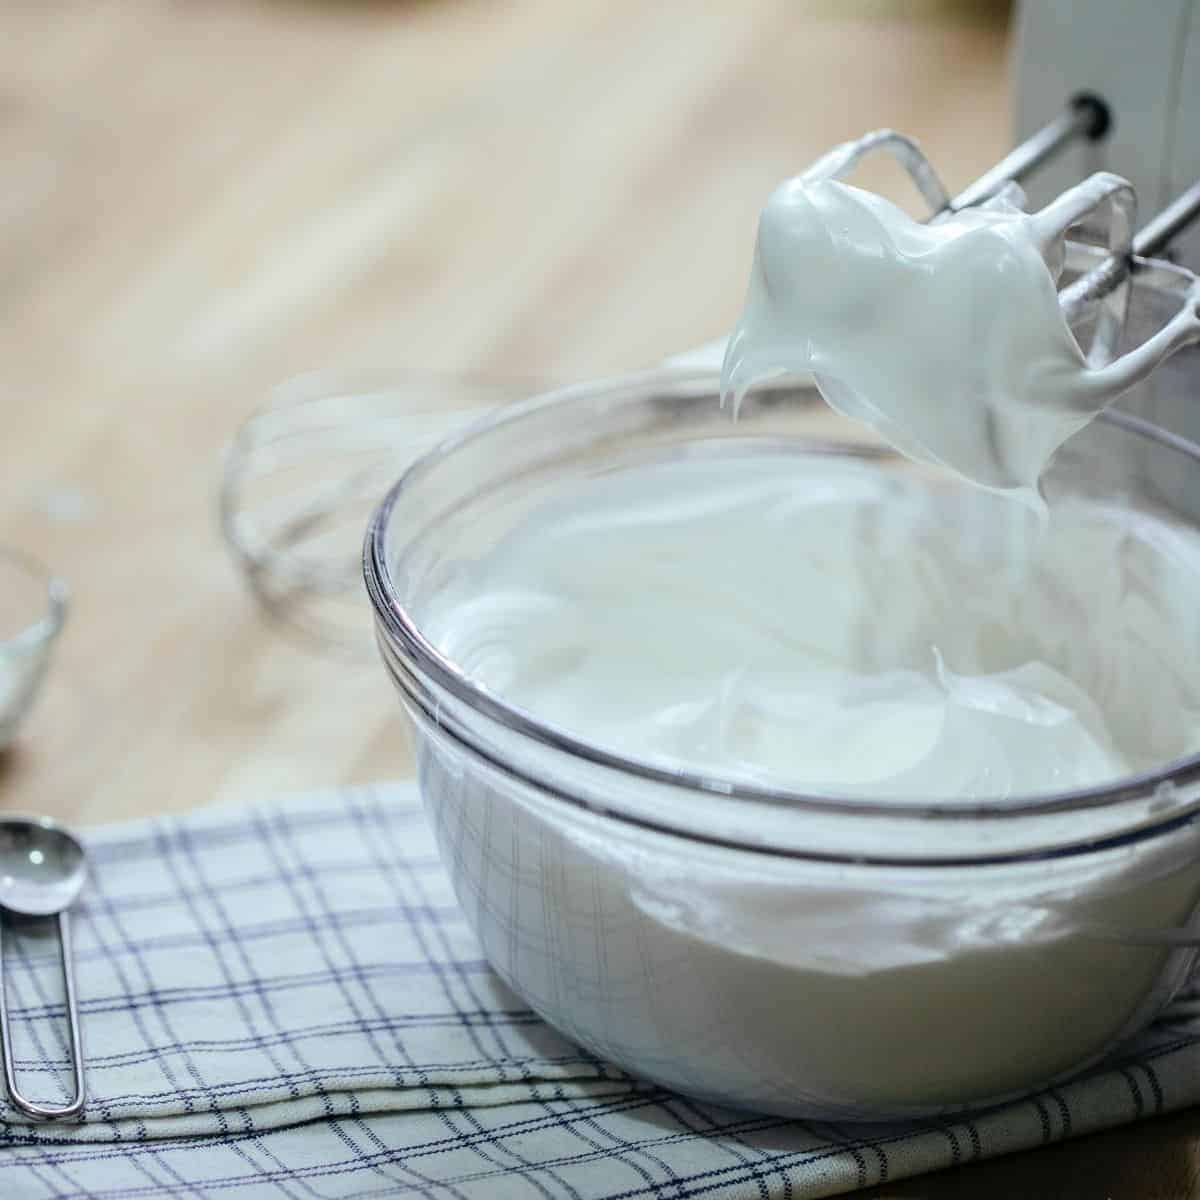 Whipped cream in a glass bowl and mixer